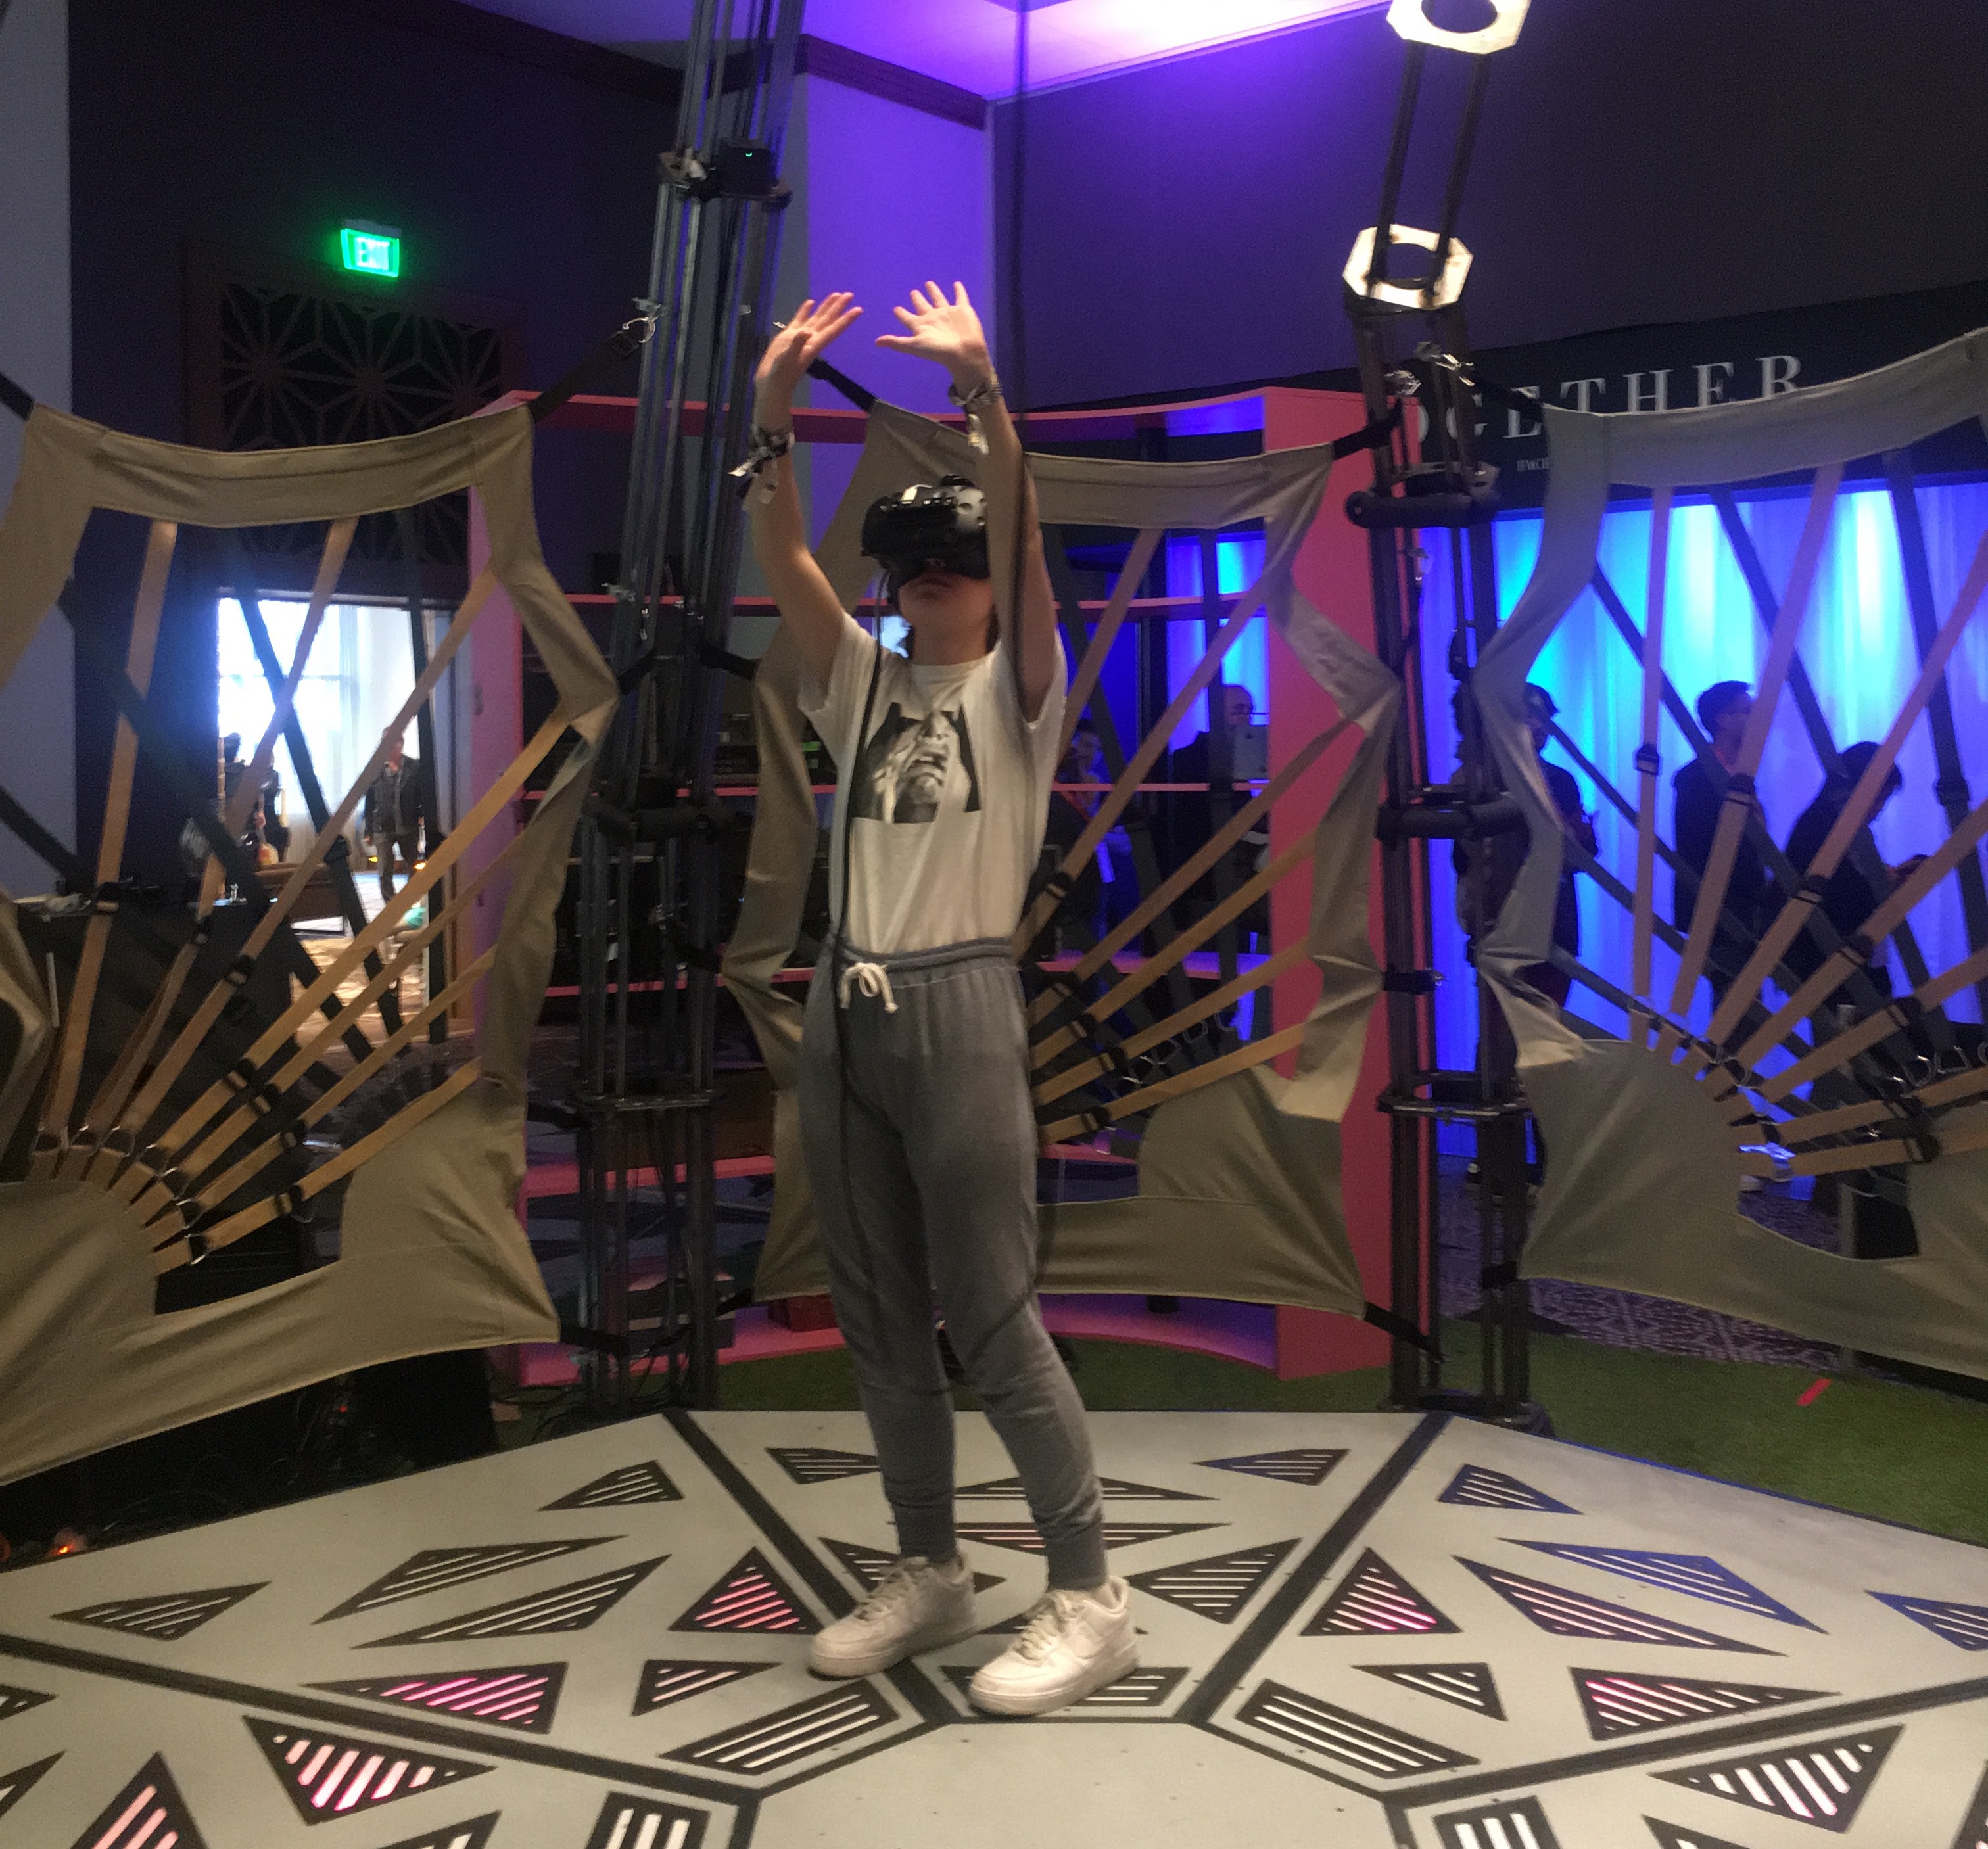 Our writer trying out the Meow Wolf VR